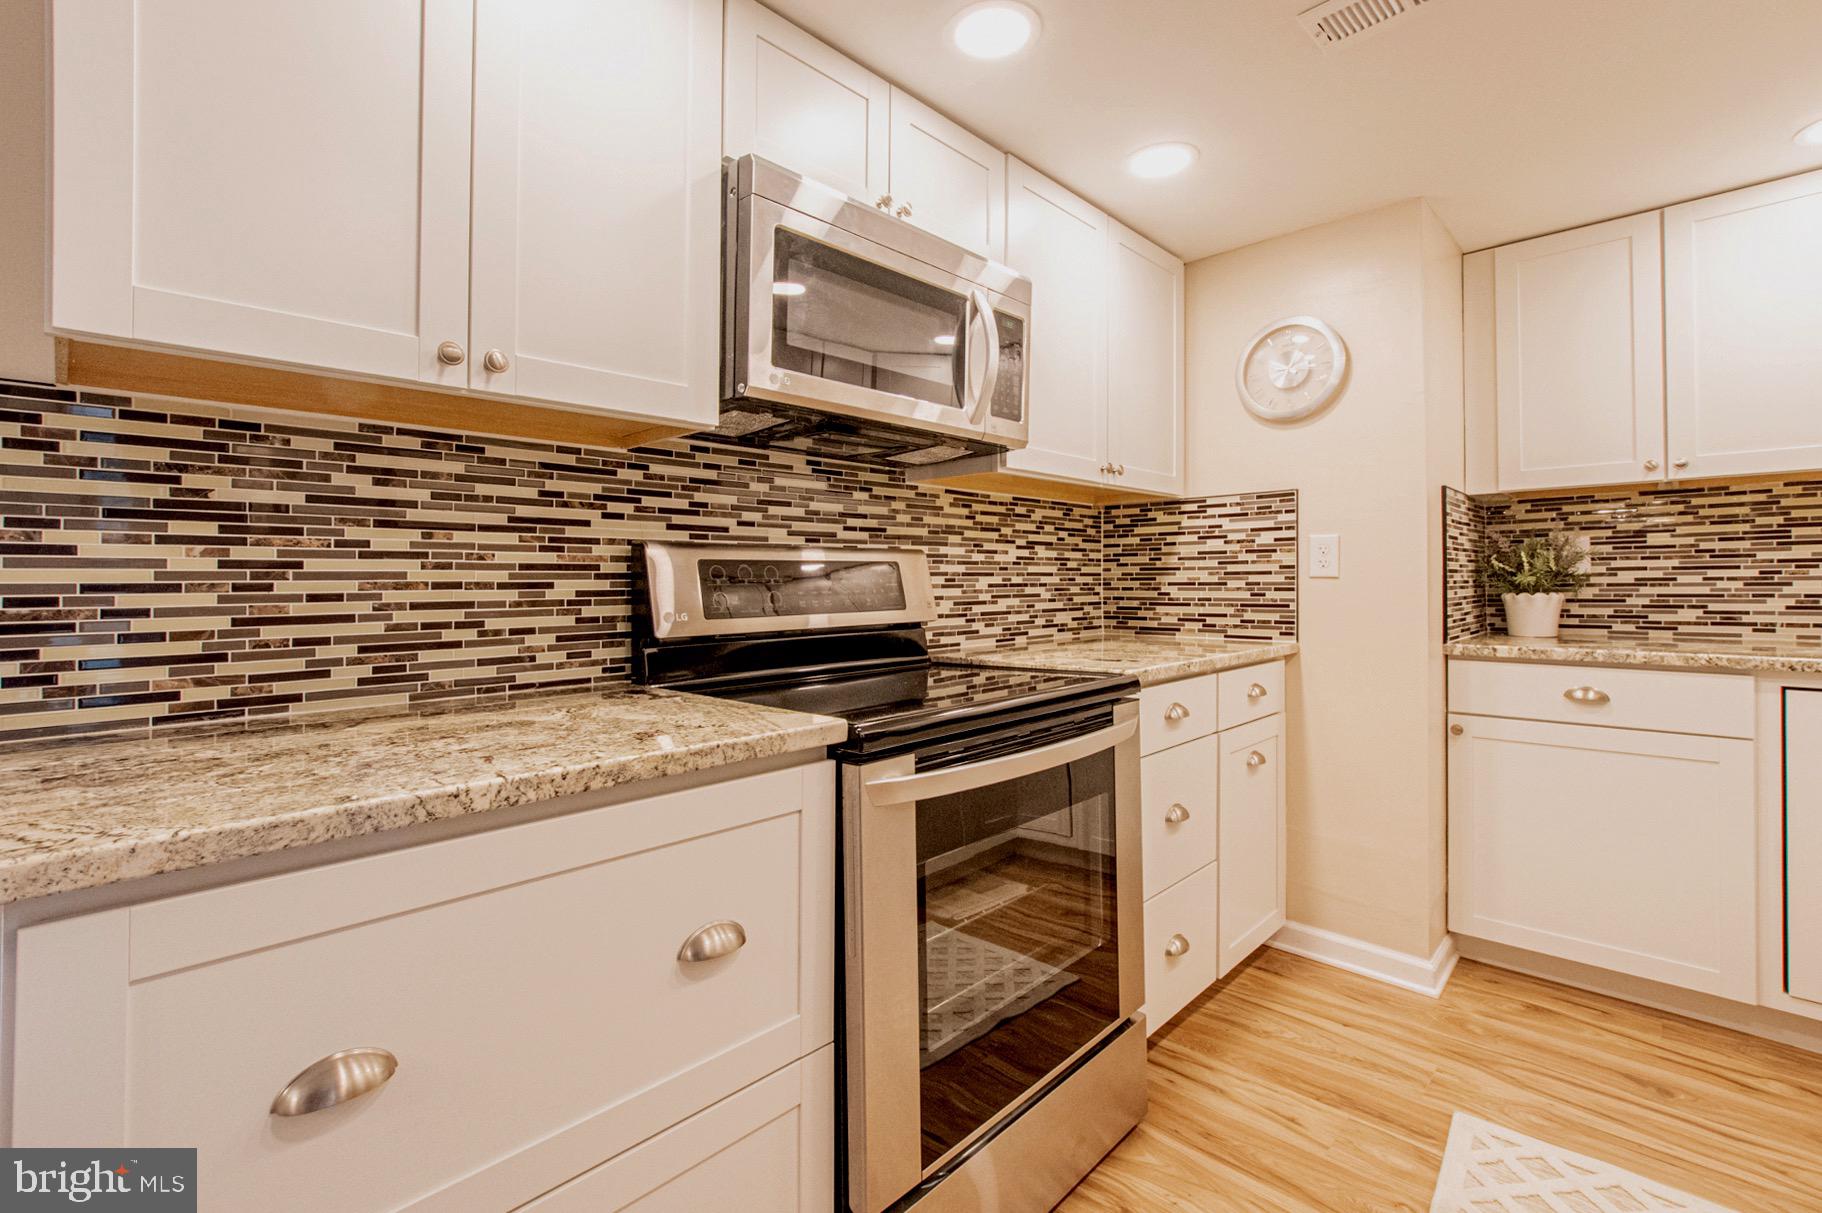 a kitchen with stainless steel appliances granite countertop white cabinets and a stove a oven with wooden floor